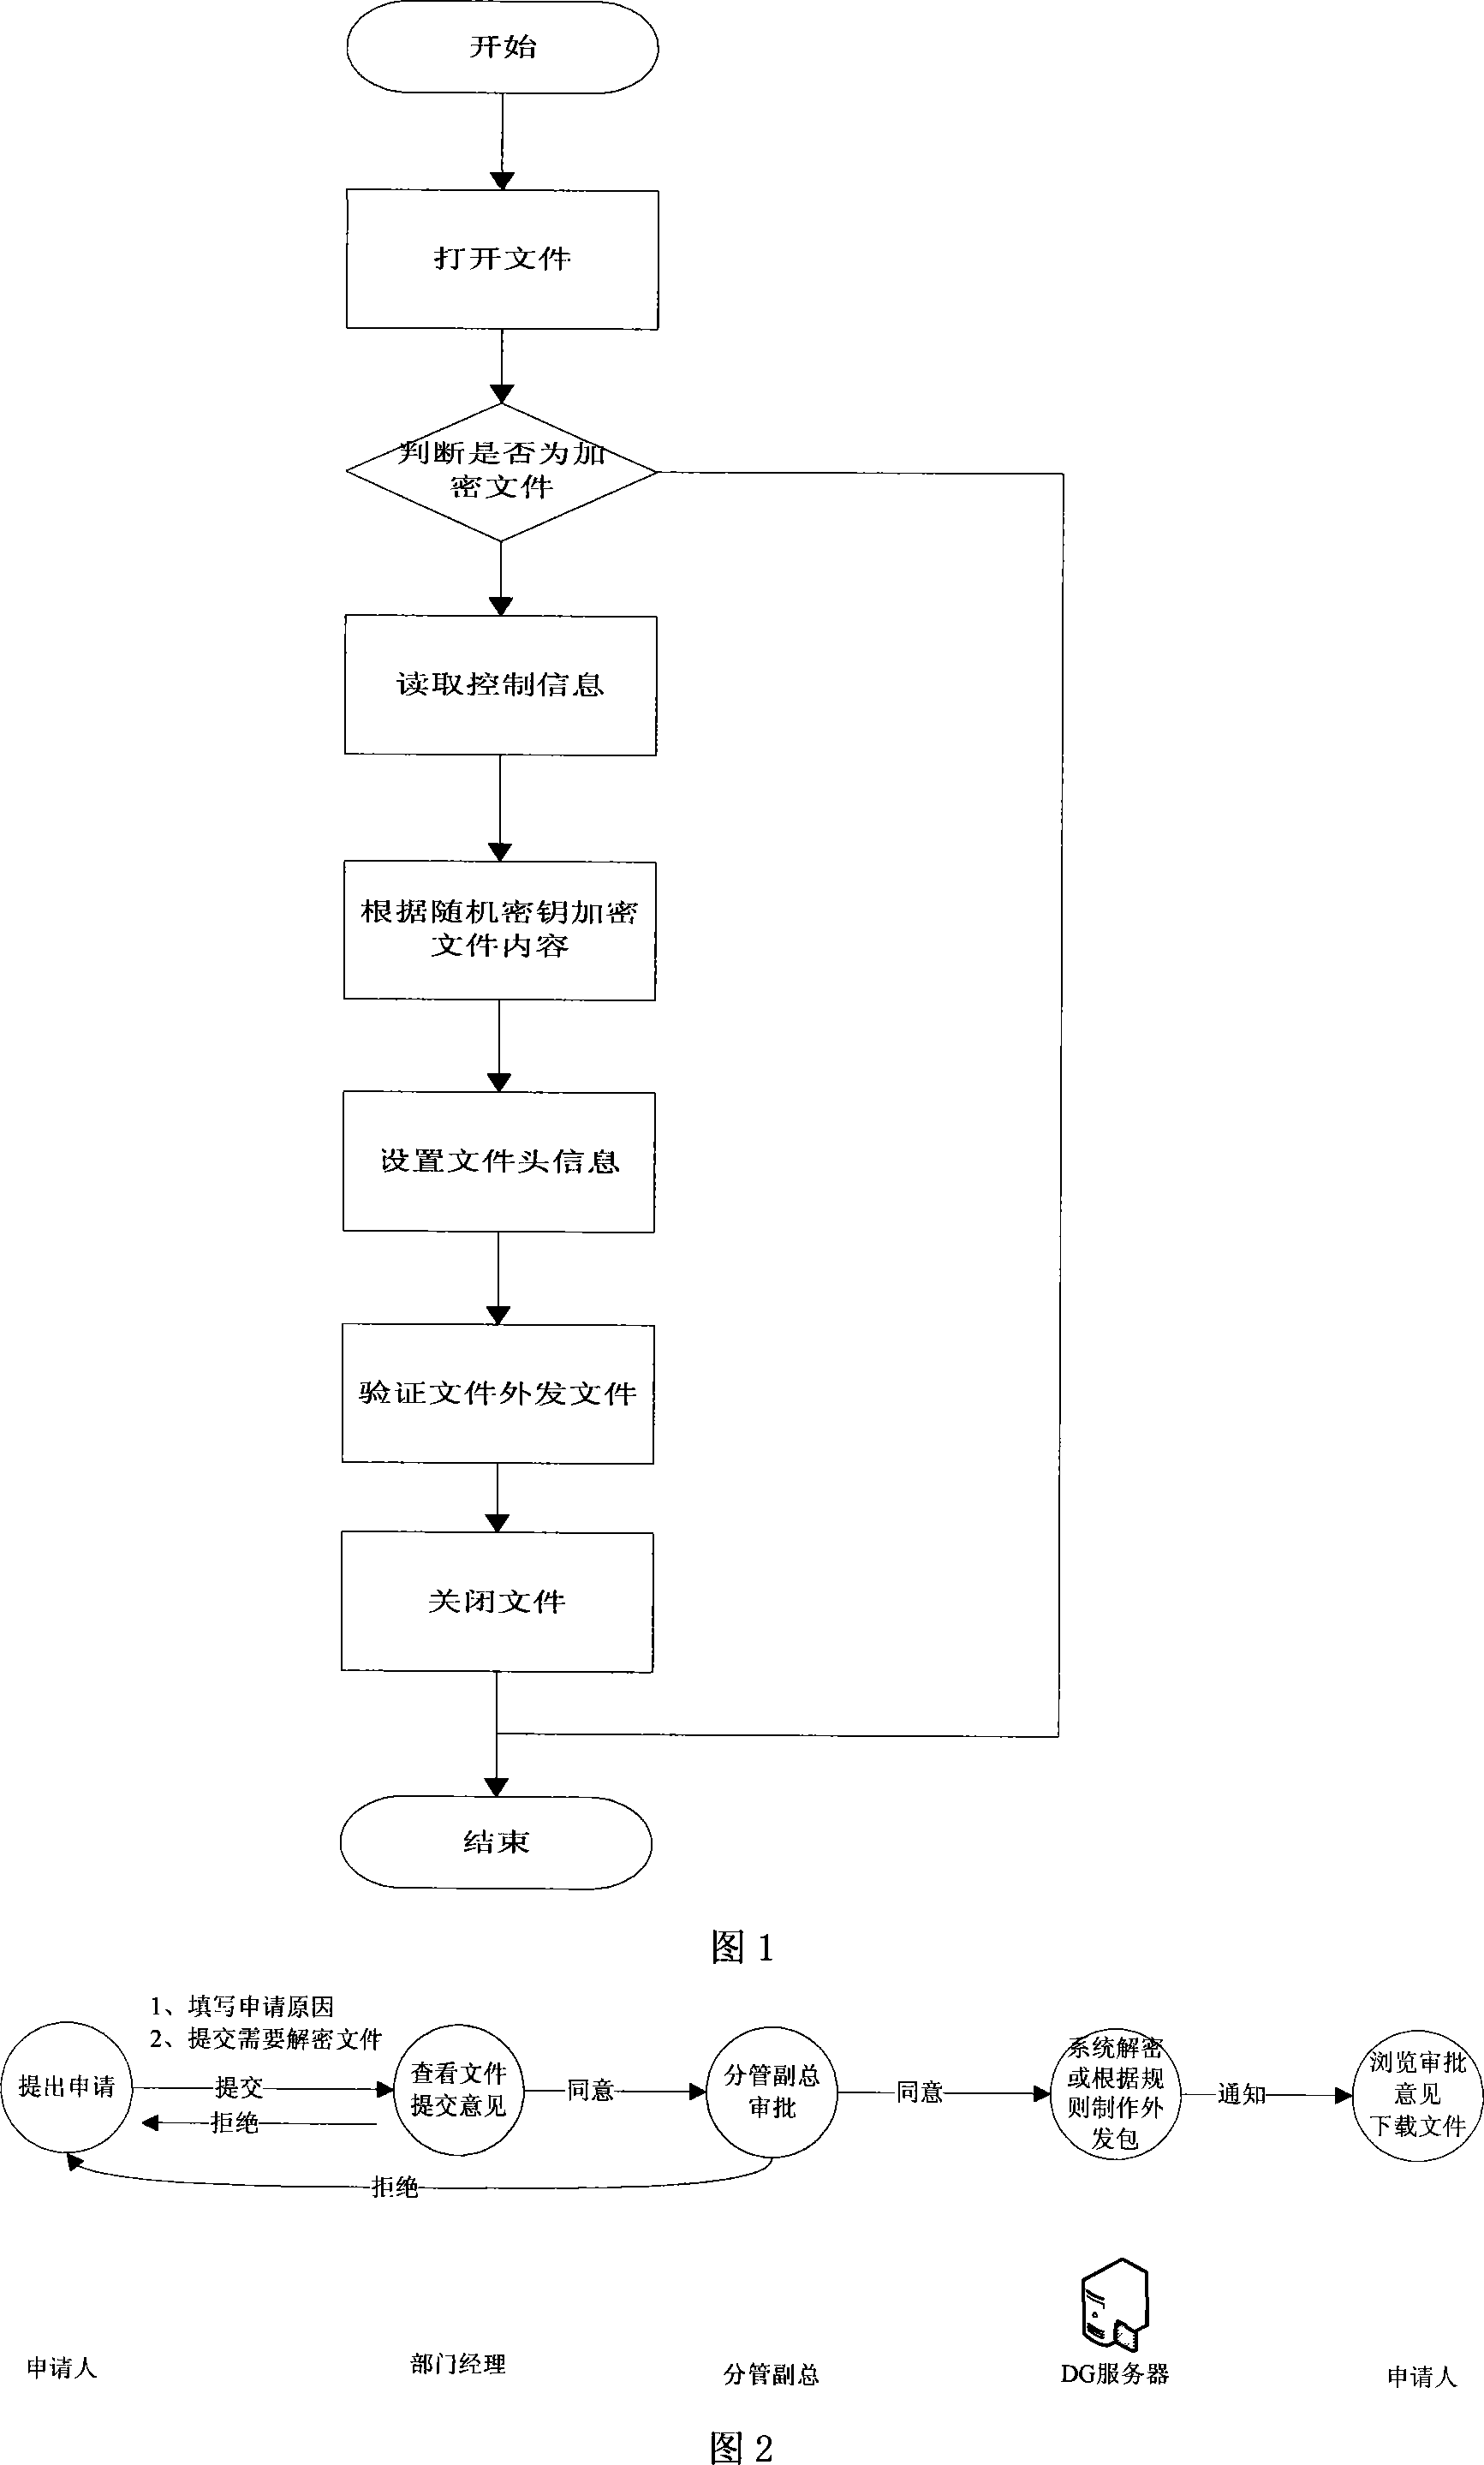 Method for safely dispensing electronic document